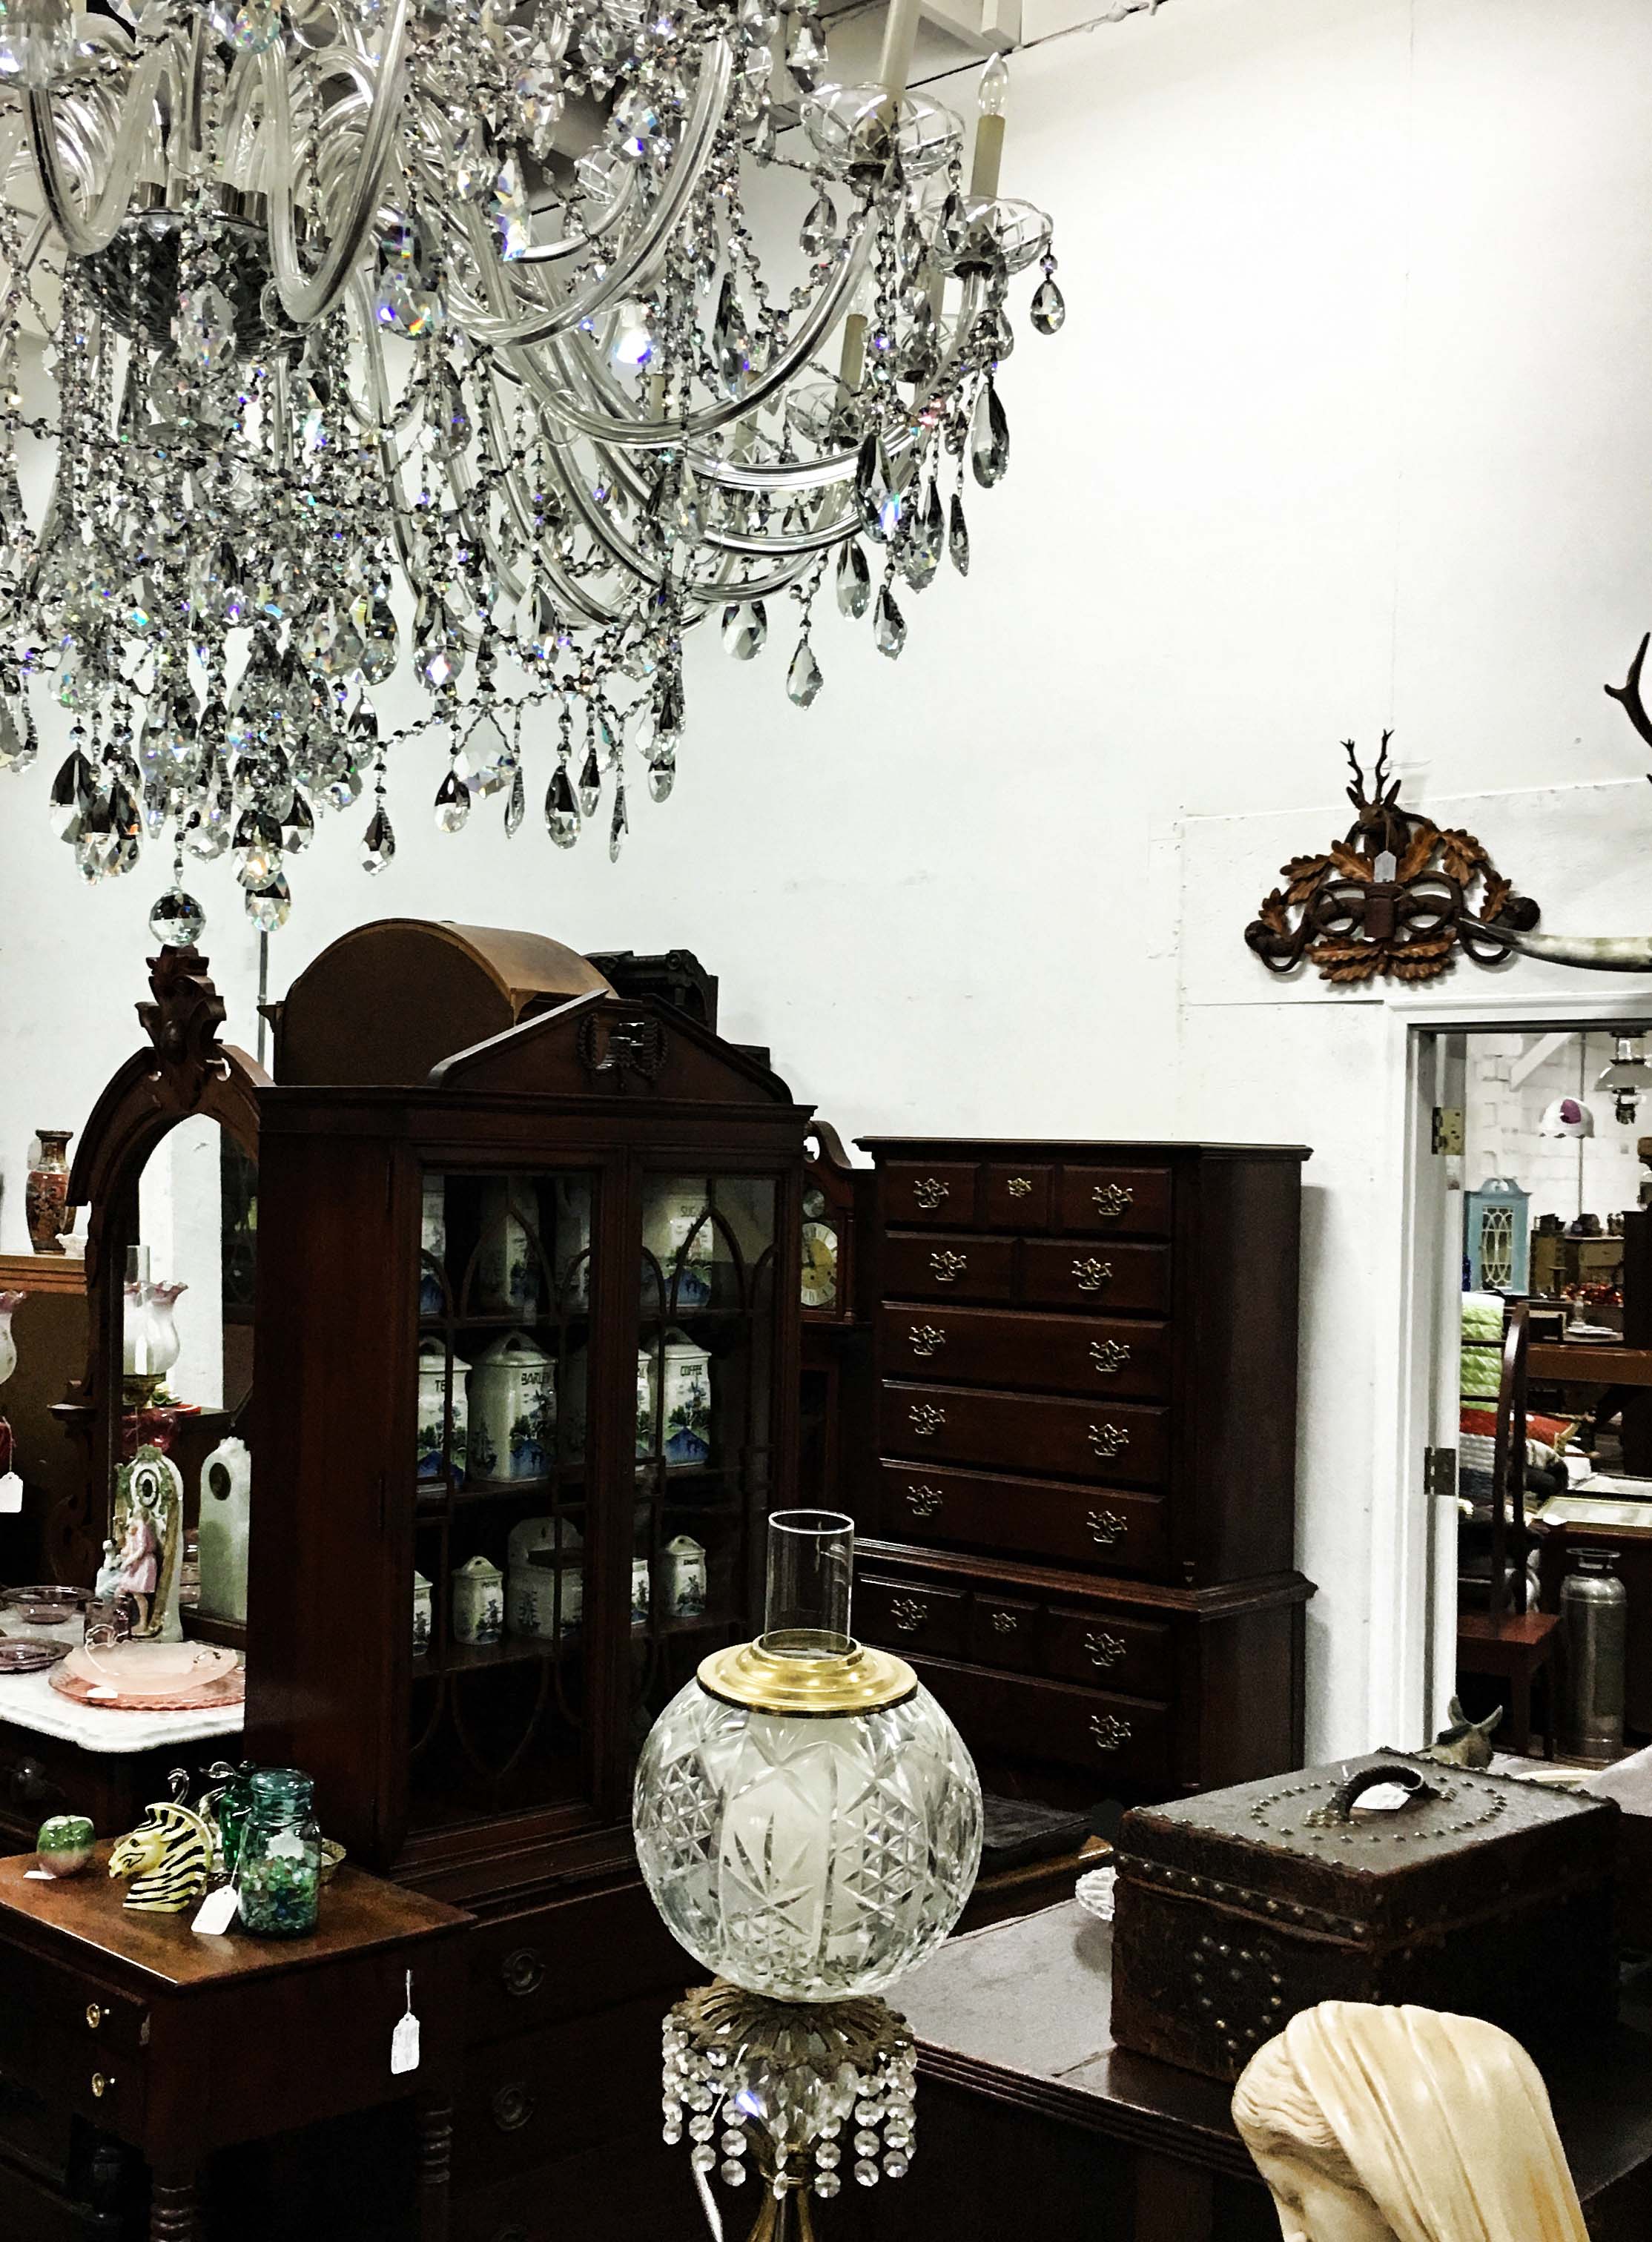 Coppersmith Antiques & Auction Company